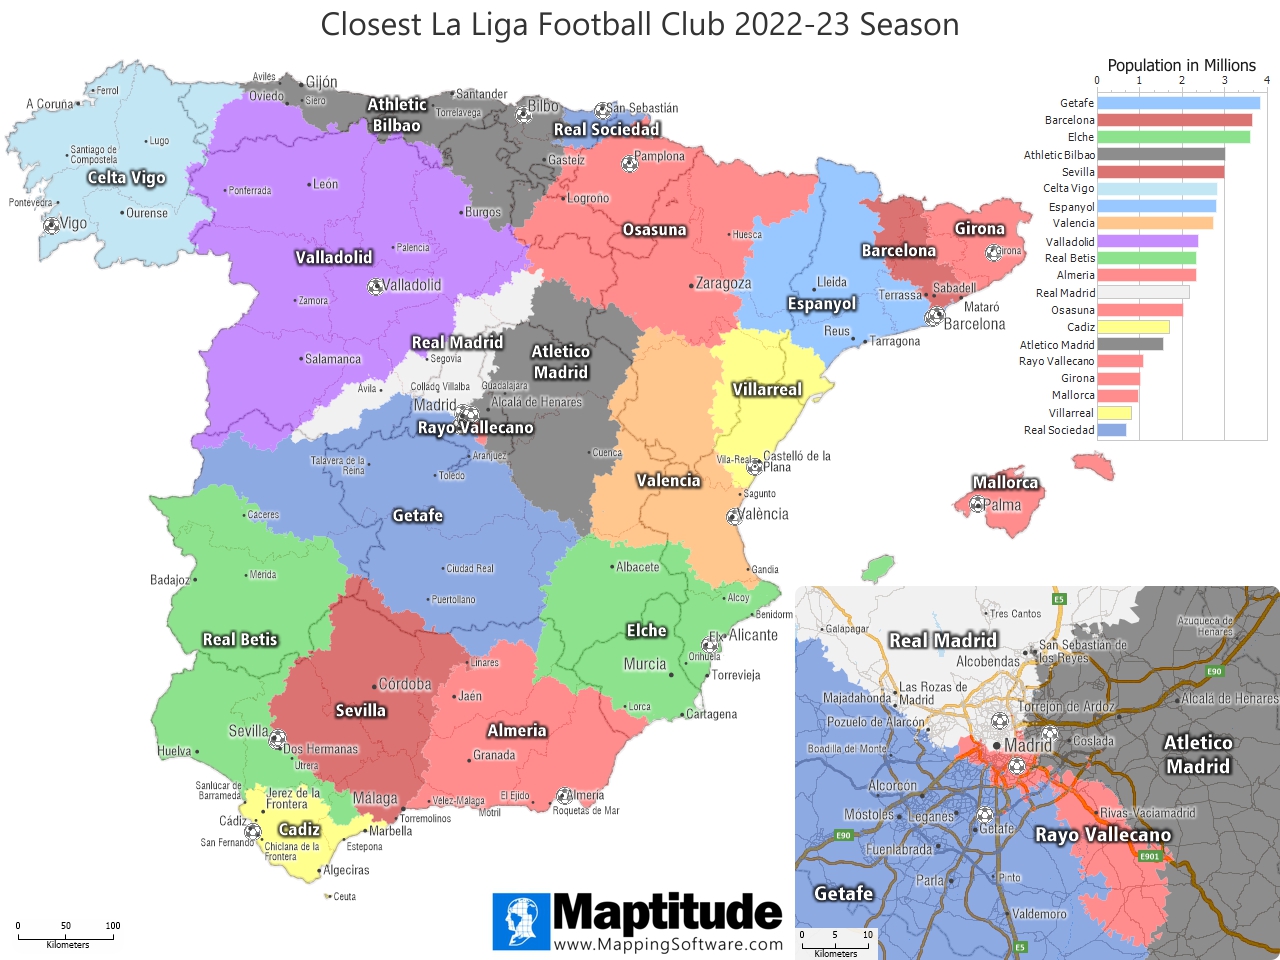 Maptitude mapping software infographic showing the Closest La Liga Football Club by drive time